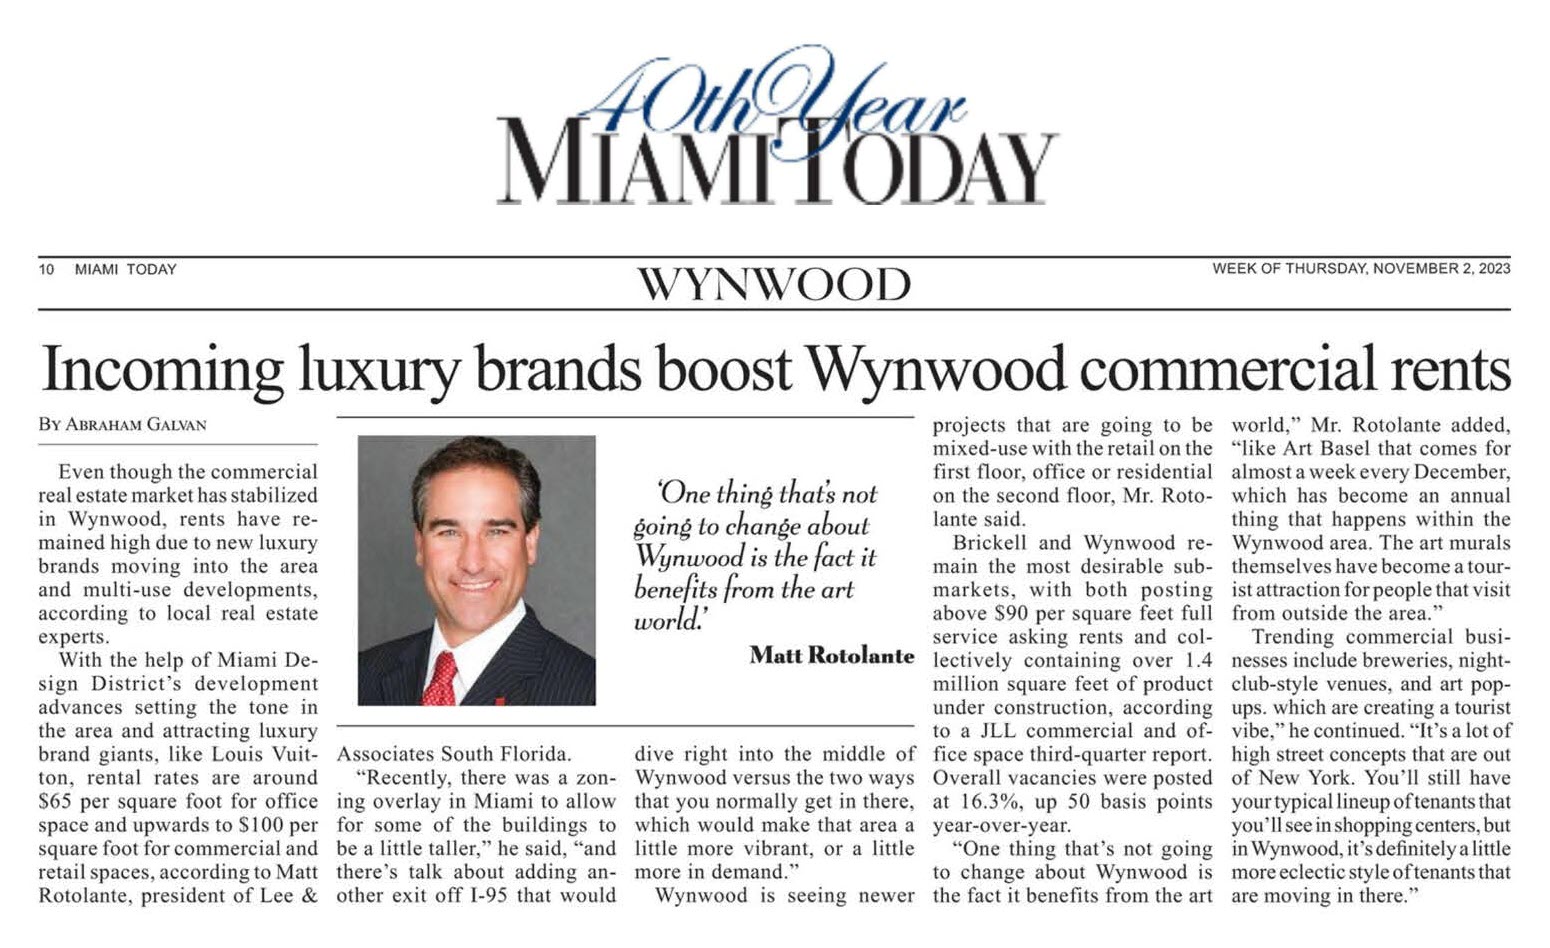 Miami Today Discusses Wynwood Commercial Rents with Lee & Associates South Florida President, Matthew Rotolante, SIOR, CCIM